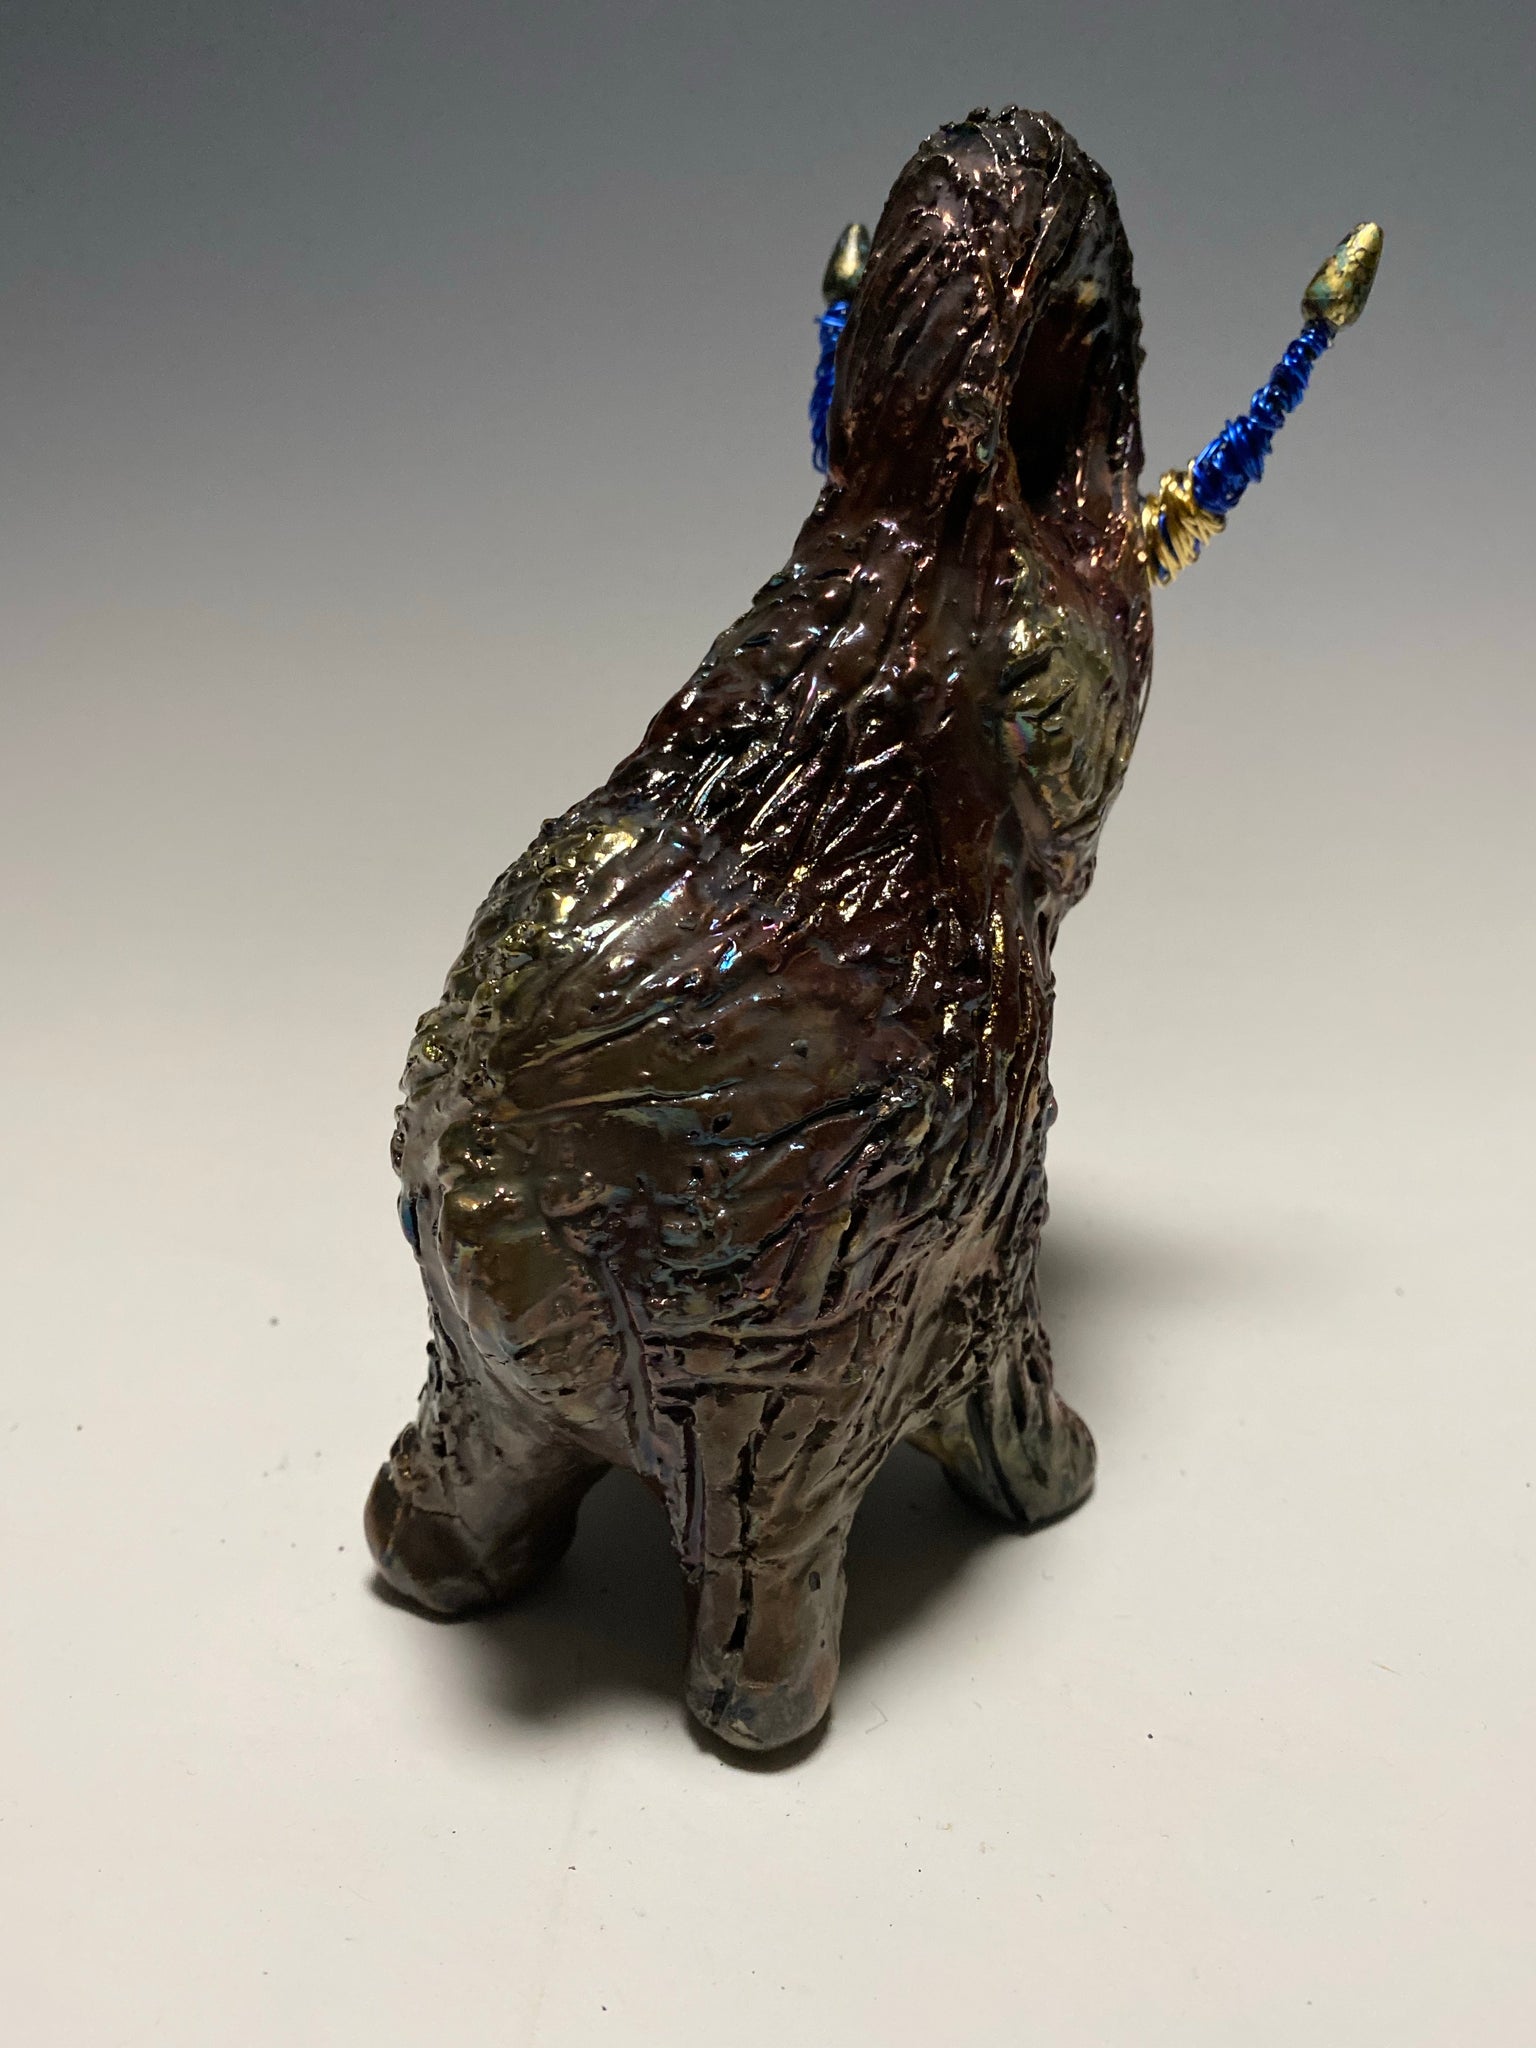 Raku Elephant Have you HERD!!!!!!  Just one of these lovely Raku Fired Elephant will make an excellent gift for your  friend, sorority or for your home’ special place centerpiece.   6" x 4" x 4" 1 lbs Beaded tusk with blue and gold wire Beautiful  colorful metallic raku elephant For decorative purposely only